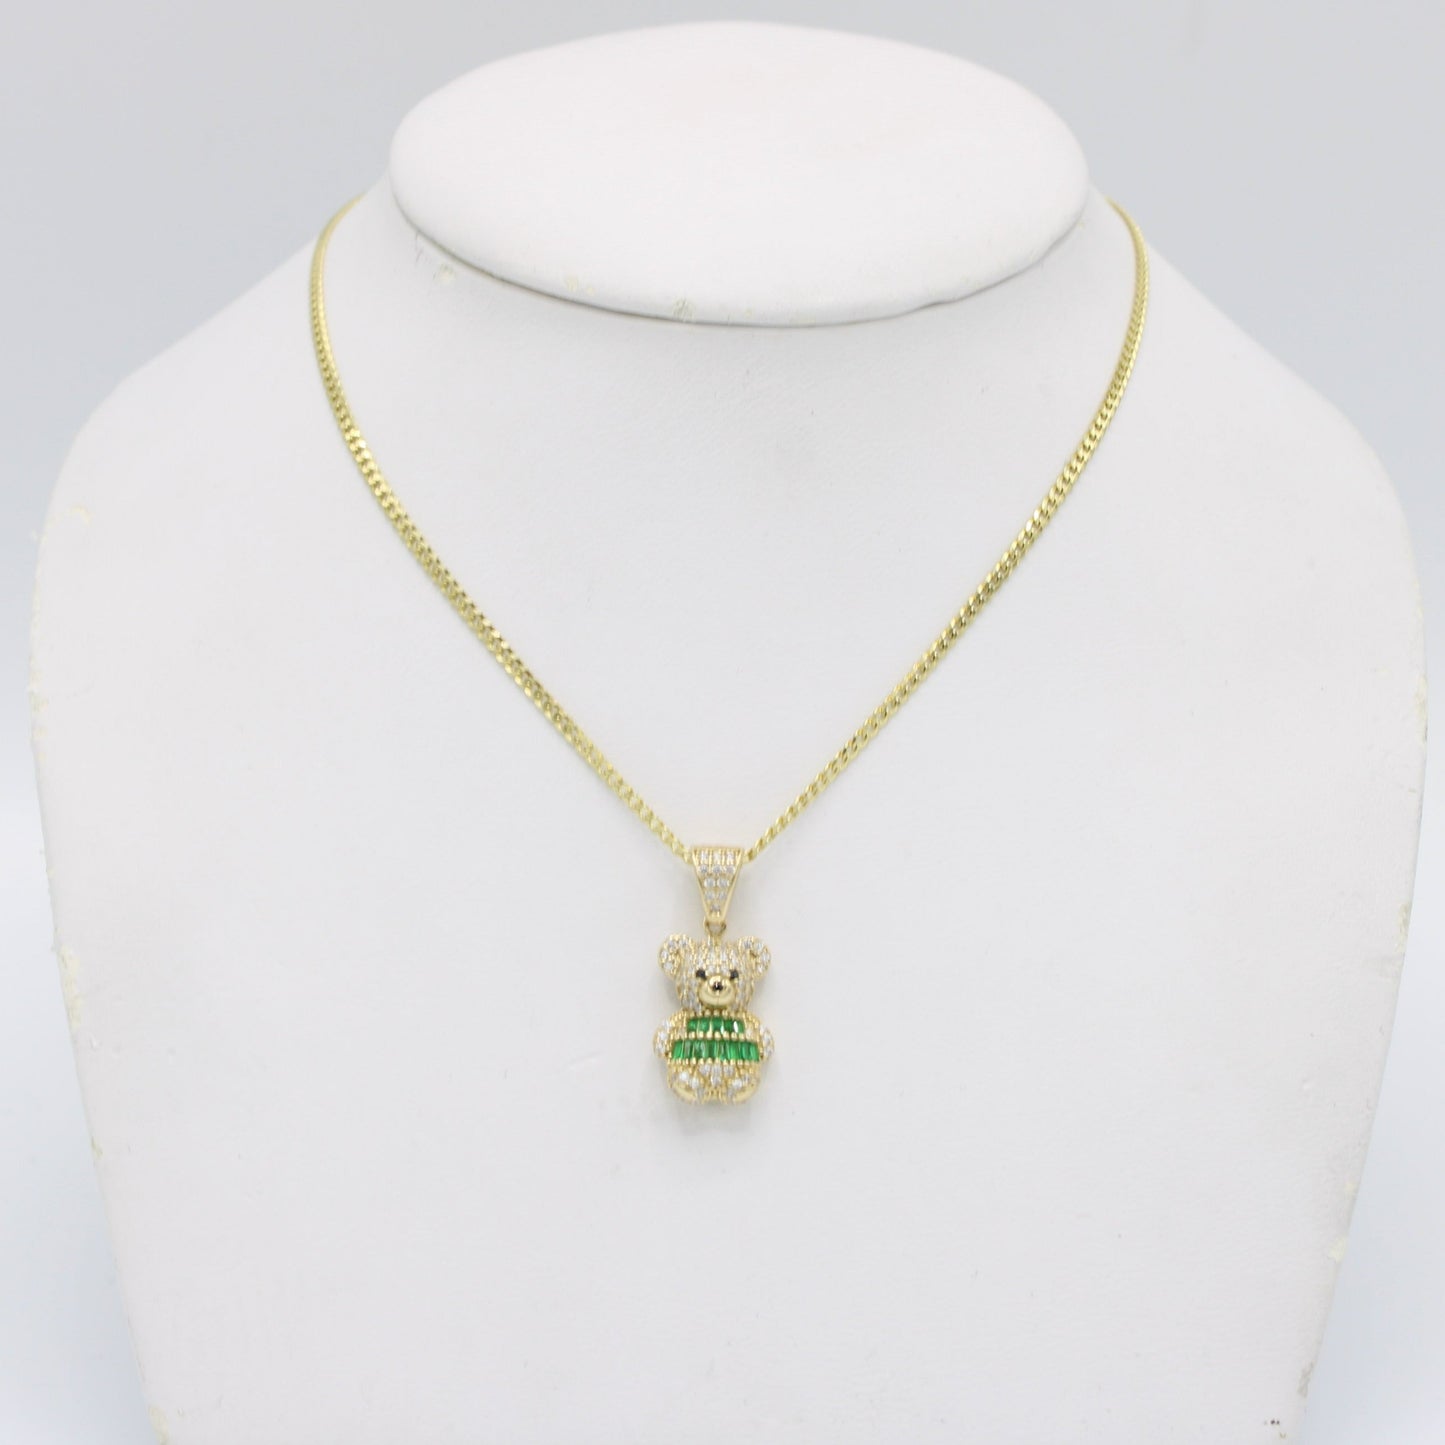 New 14K Teddy Bear Pendant Cz Stones with Solid Flat Cuban Chain Yellow Gold